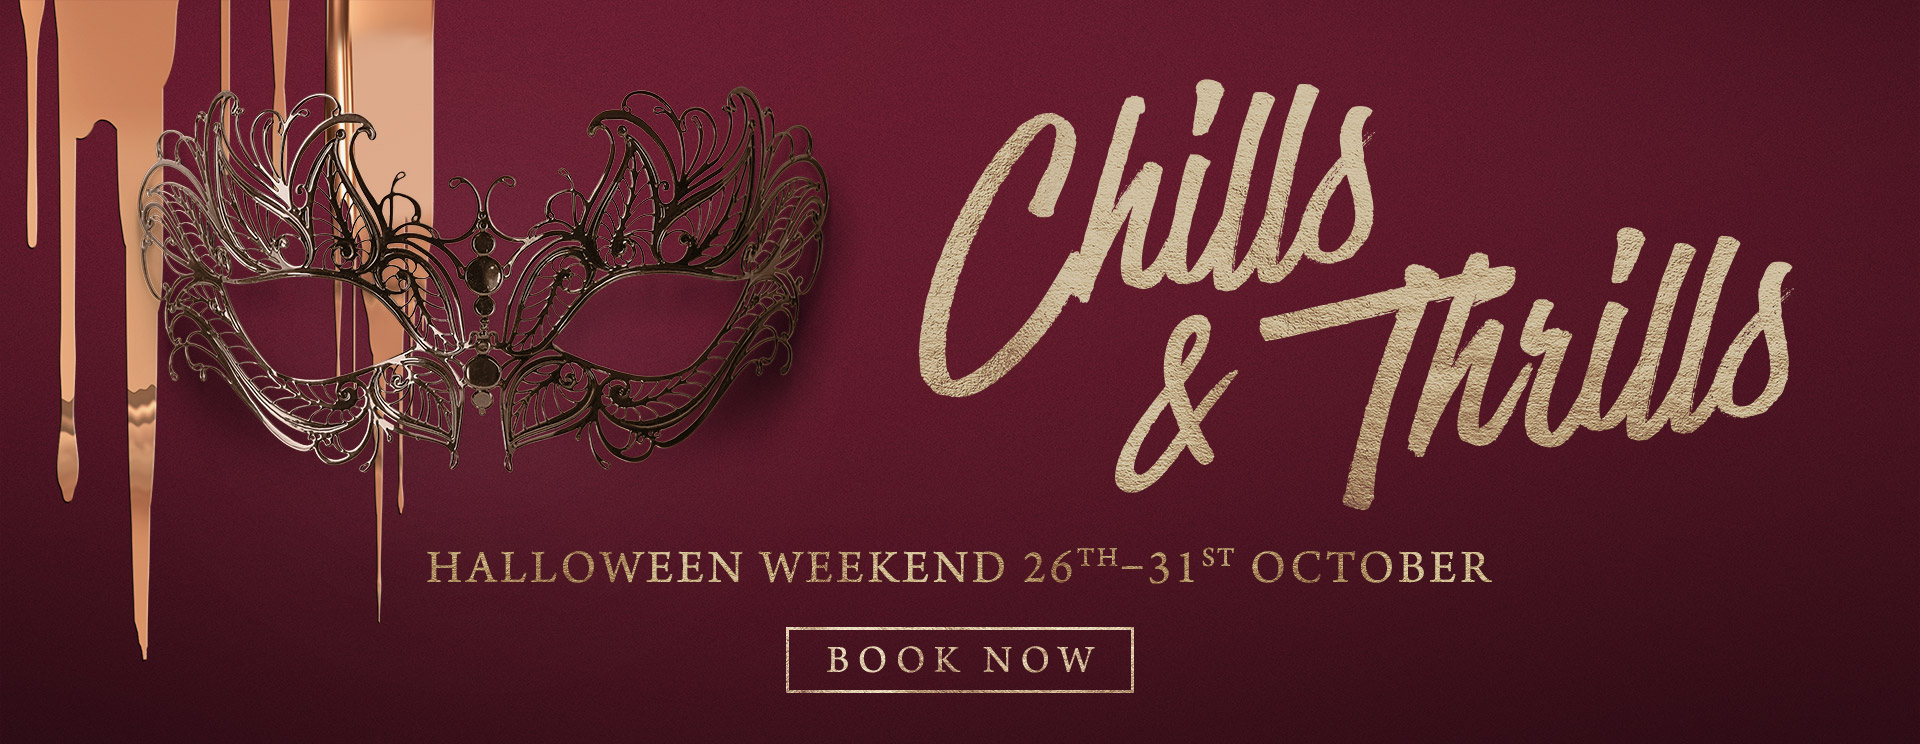 Chills & Thrills this Halloween at The Kings Arms